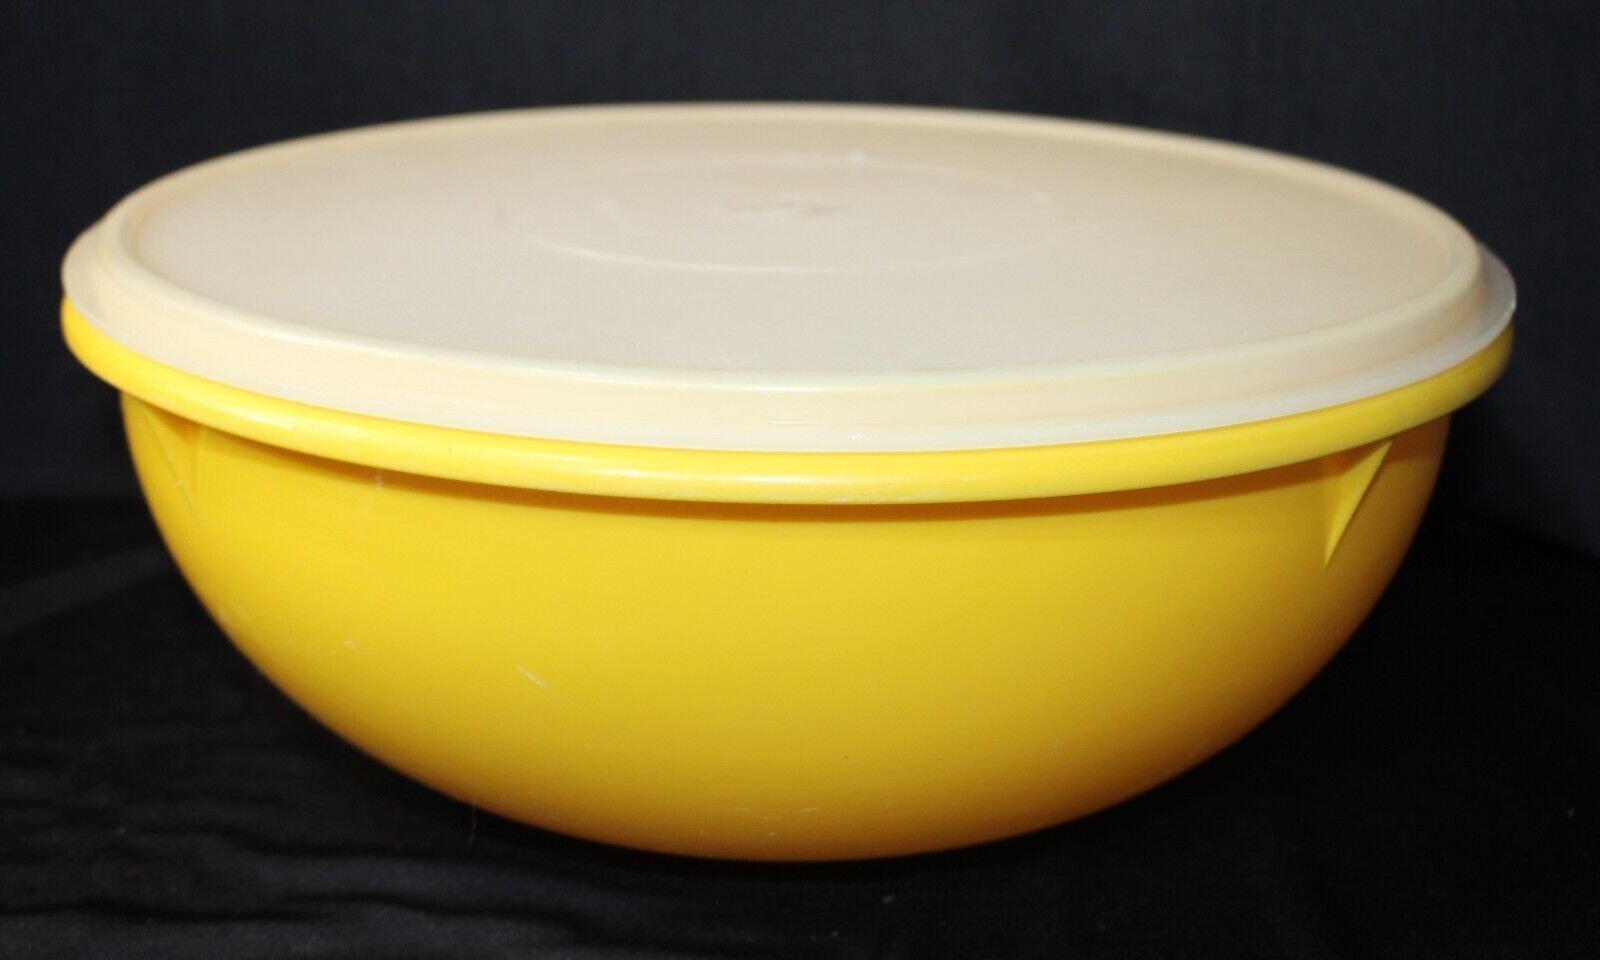 Vintage Tupperware Large Fix N Mix Yellow Food Container Bowl #274 #224 - clean